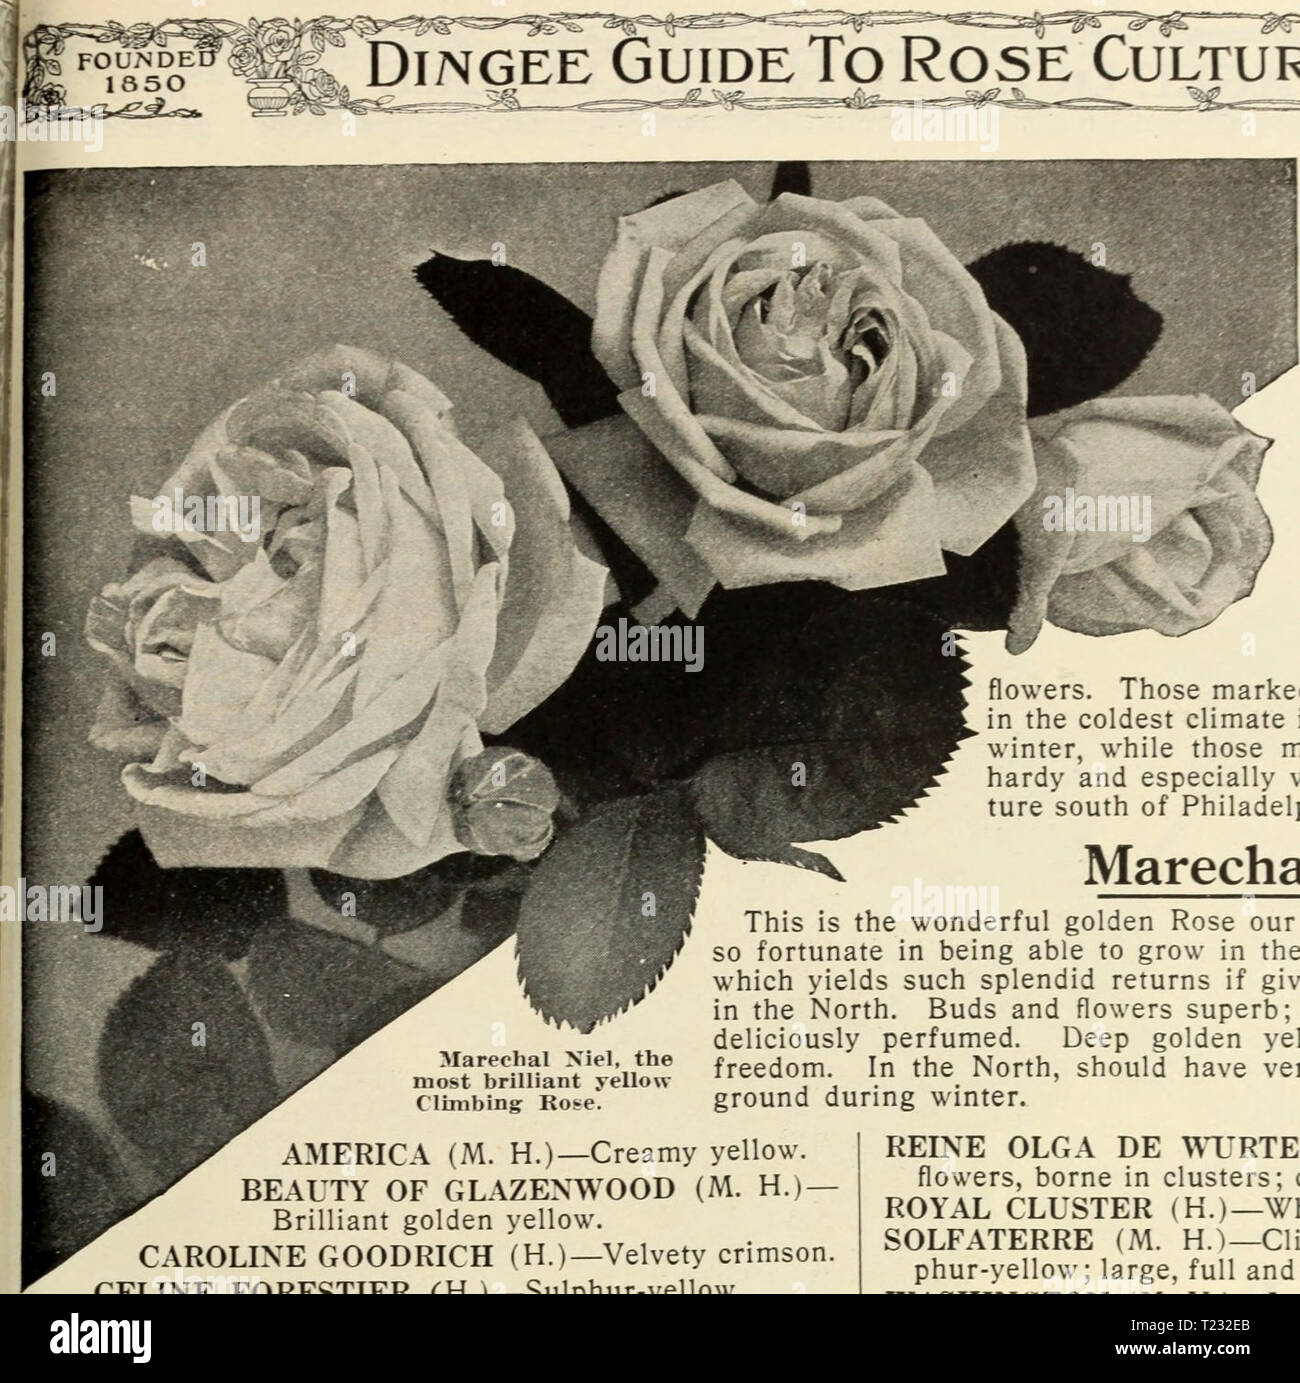 Archive image from page 80 of Dingee guide to rose culture Dingee guide to rose culture  dingeeguidetoros19ding 7 Year: 1916  DiNGEE Guide To Rose Culture    Mareclial Nlel, the most brilliant yellow Climbing Ko*e. AMERICA (M. H.)—Creamy yellow. BEAUTY OF GLAZEXWOOD (M. H.; Brilliant golden yellow. CAROLINE GOODRICH (H.)—Velvety crimson. CELINE FORESTIER (H.)—Sulphur-yellow. CLAIRE CARNOT (H.)—Buff or orange-yellow. CHROMATELLA (Cloth of Gold) (M. HJ—Bright yellow. CLIMBING DEVONIENSIS (H.)—White, tinged with blush. CLIMBING HERMOSA (H.)—Flowers borne in great pro- fusion; clear, bright pink.  Stock Photo